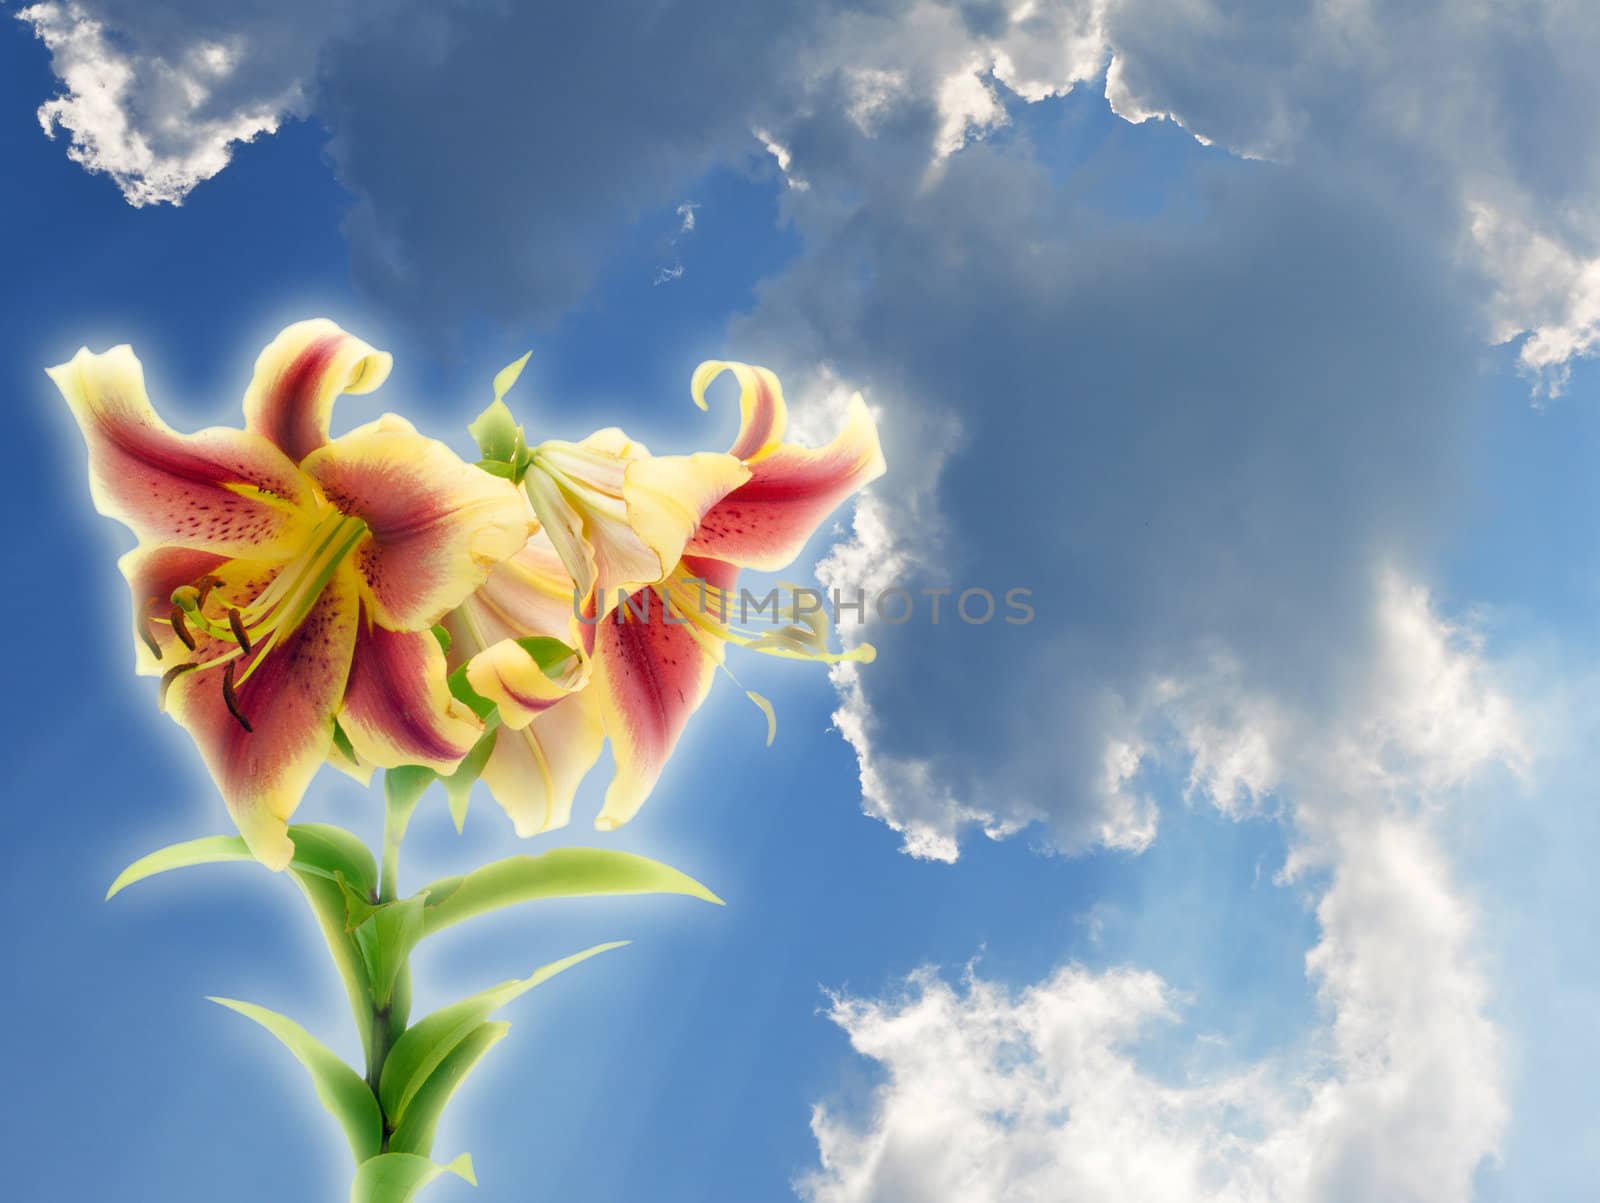 Lily flower against the blue sky with clouds